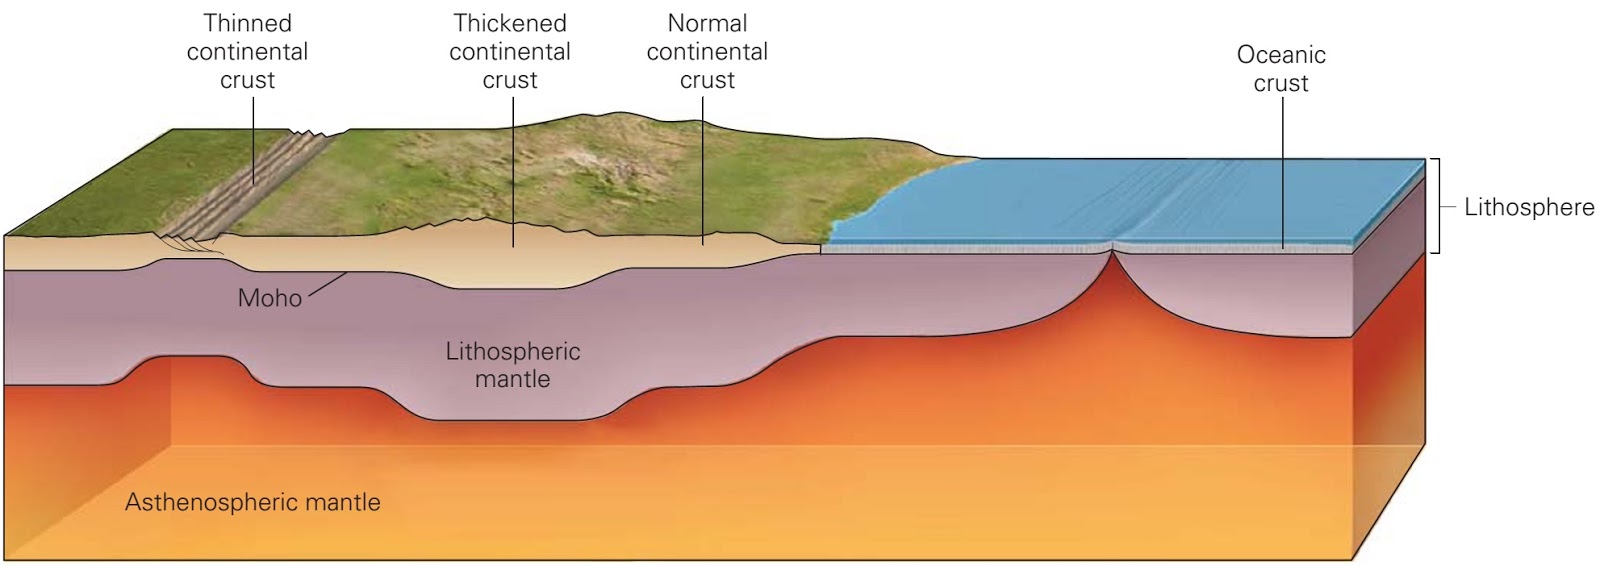 What is the lithosphere made of?